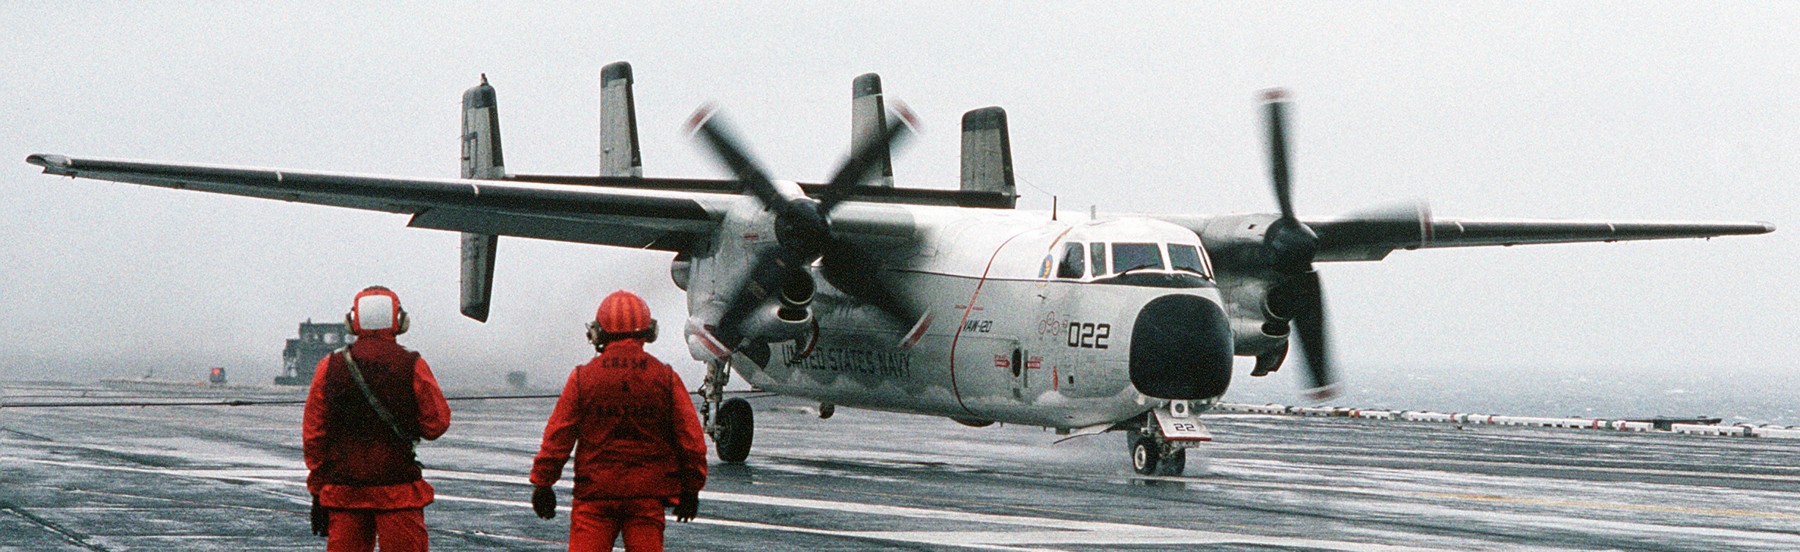 vaw-120 greyhawks carrier airborne early warning squadron c-2a greyhound replacement uss dwight d. eisenhower cvn-69 128